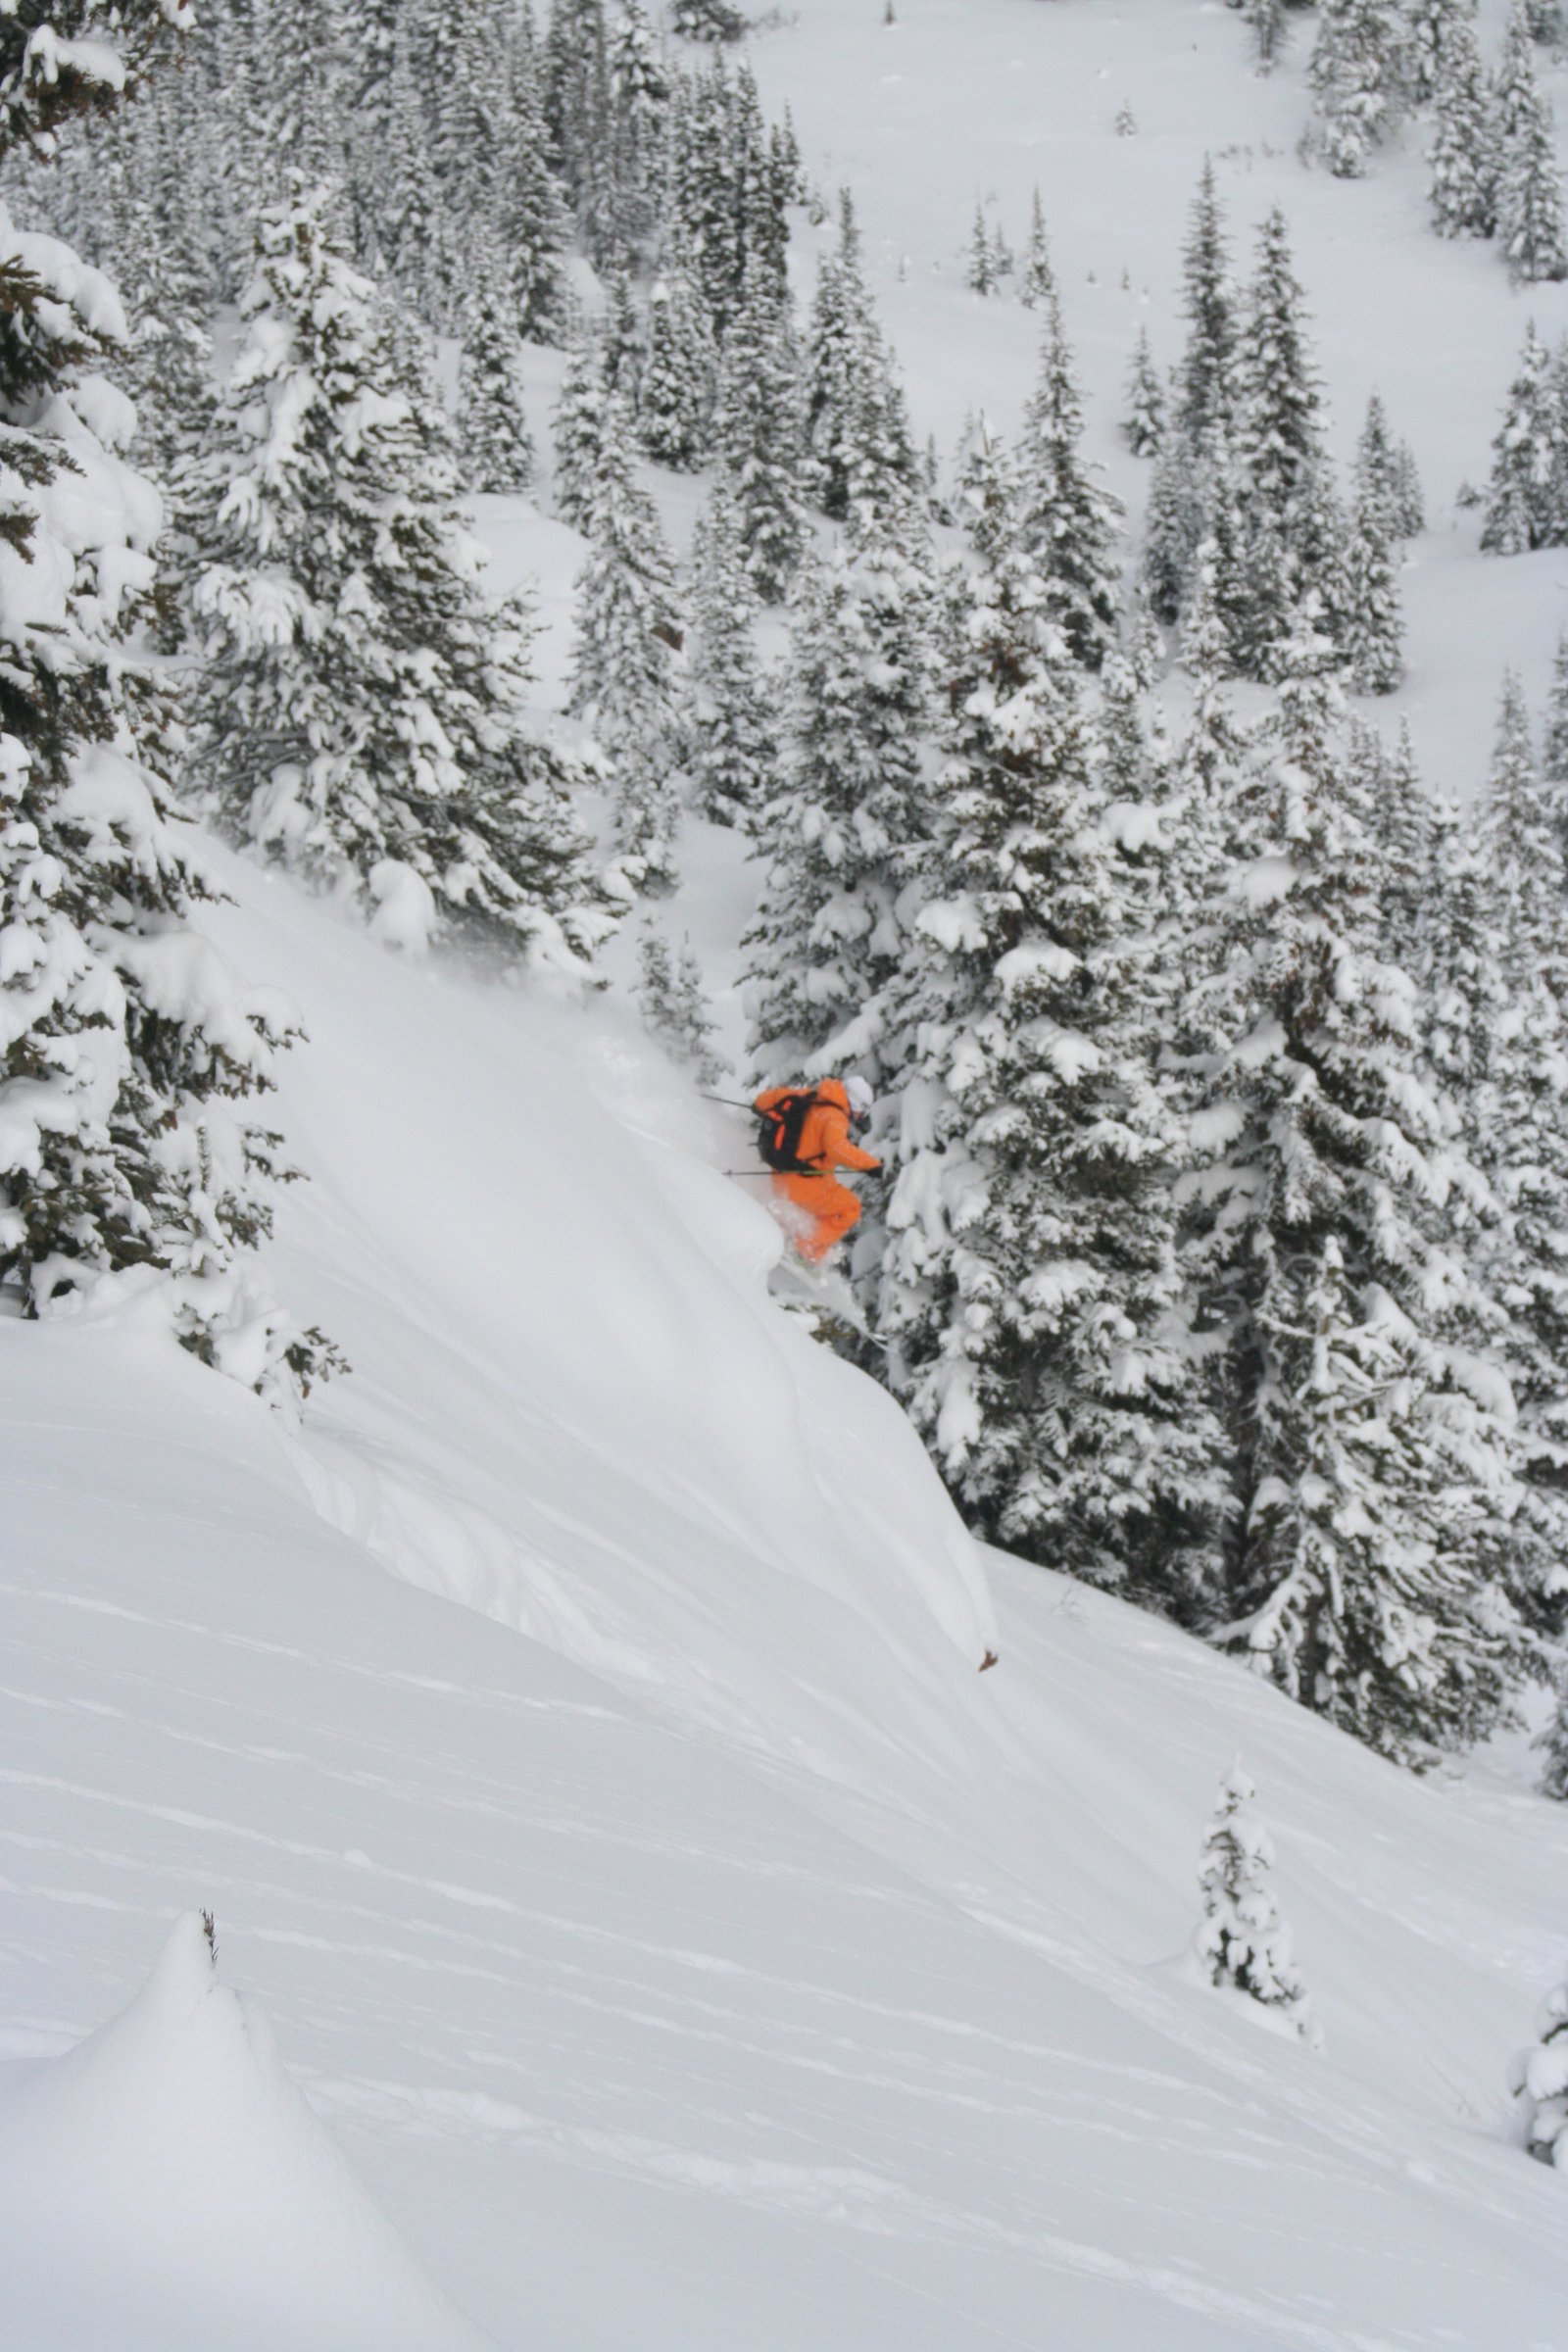 Craig in the Pow on Vail Pass